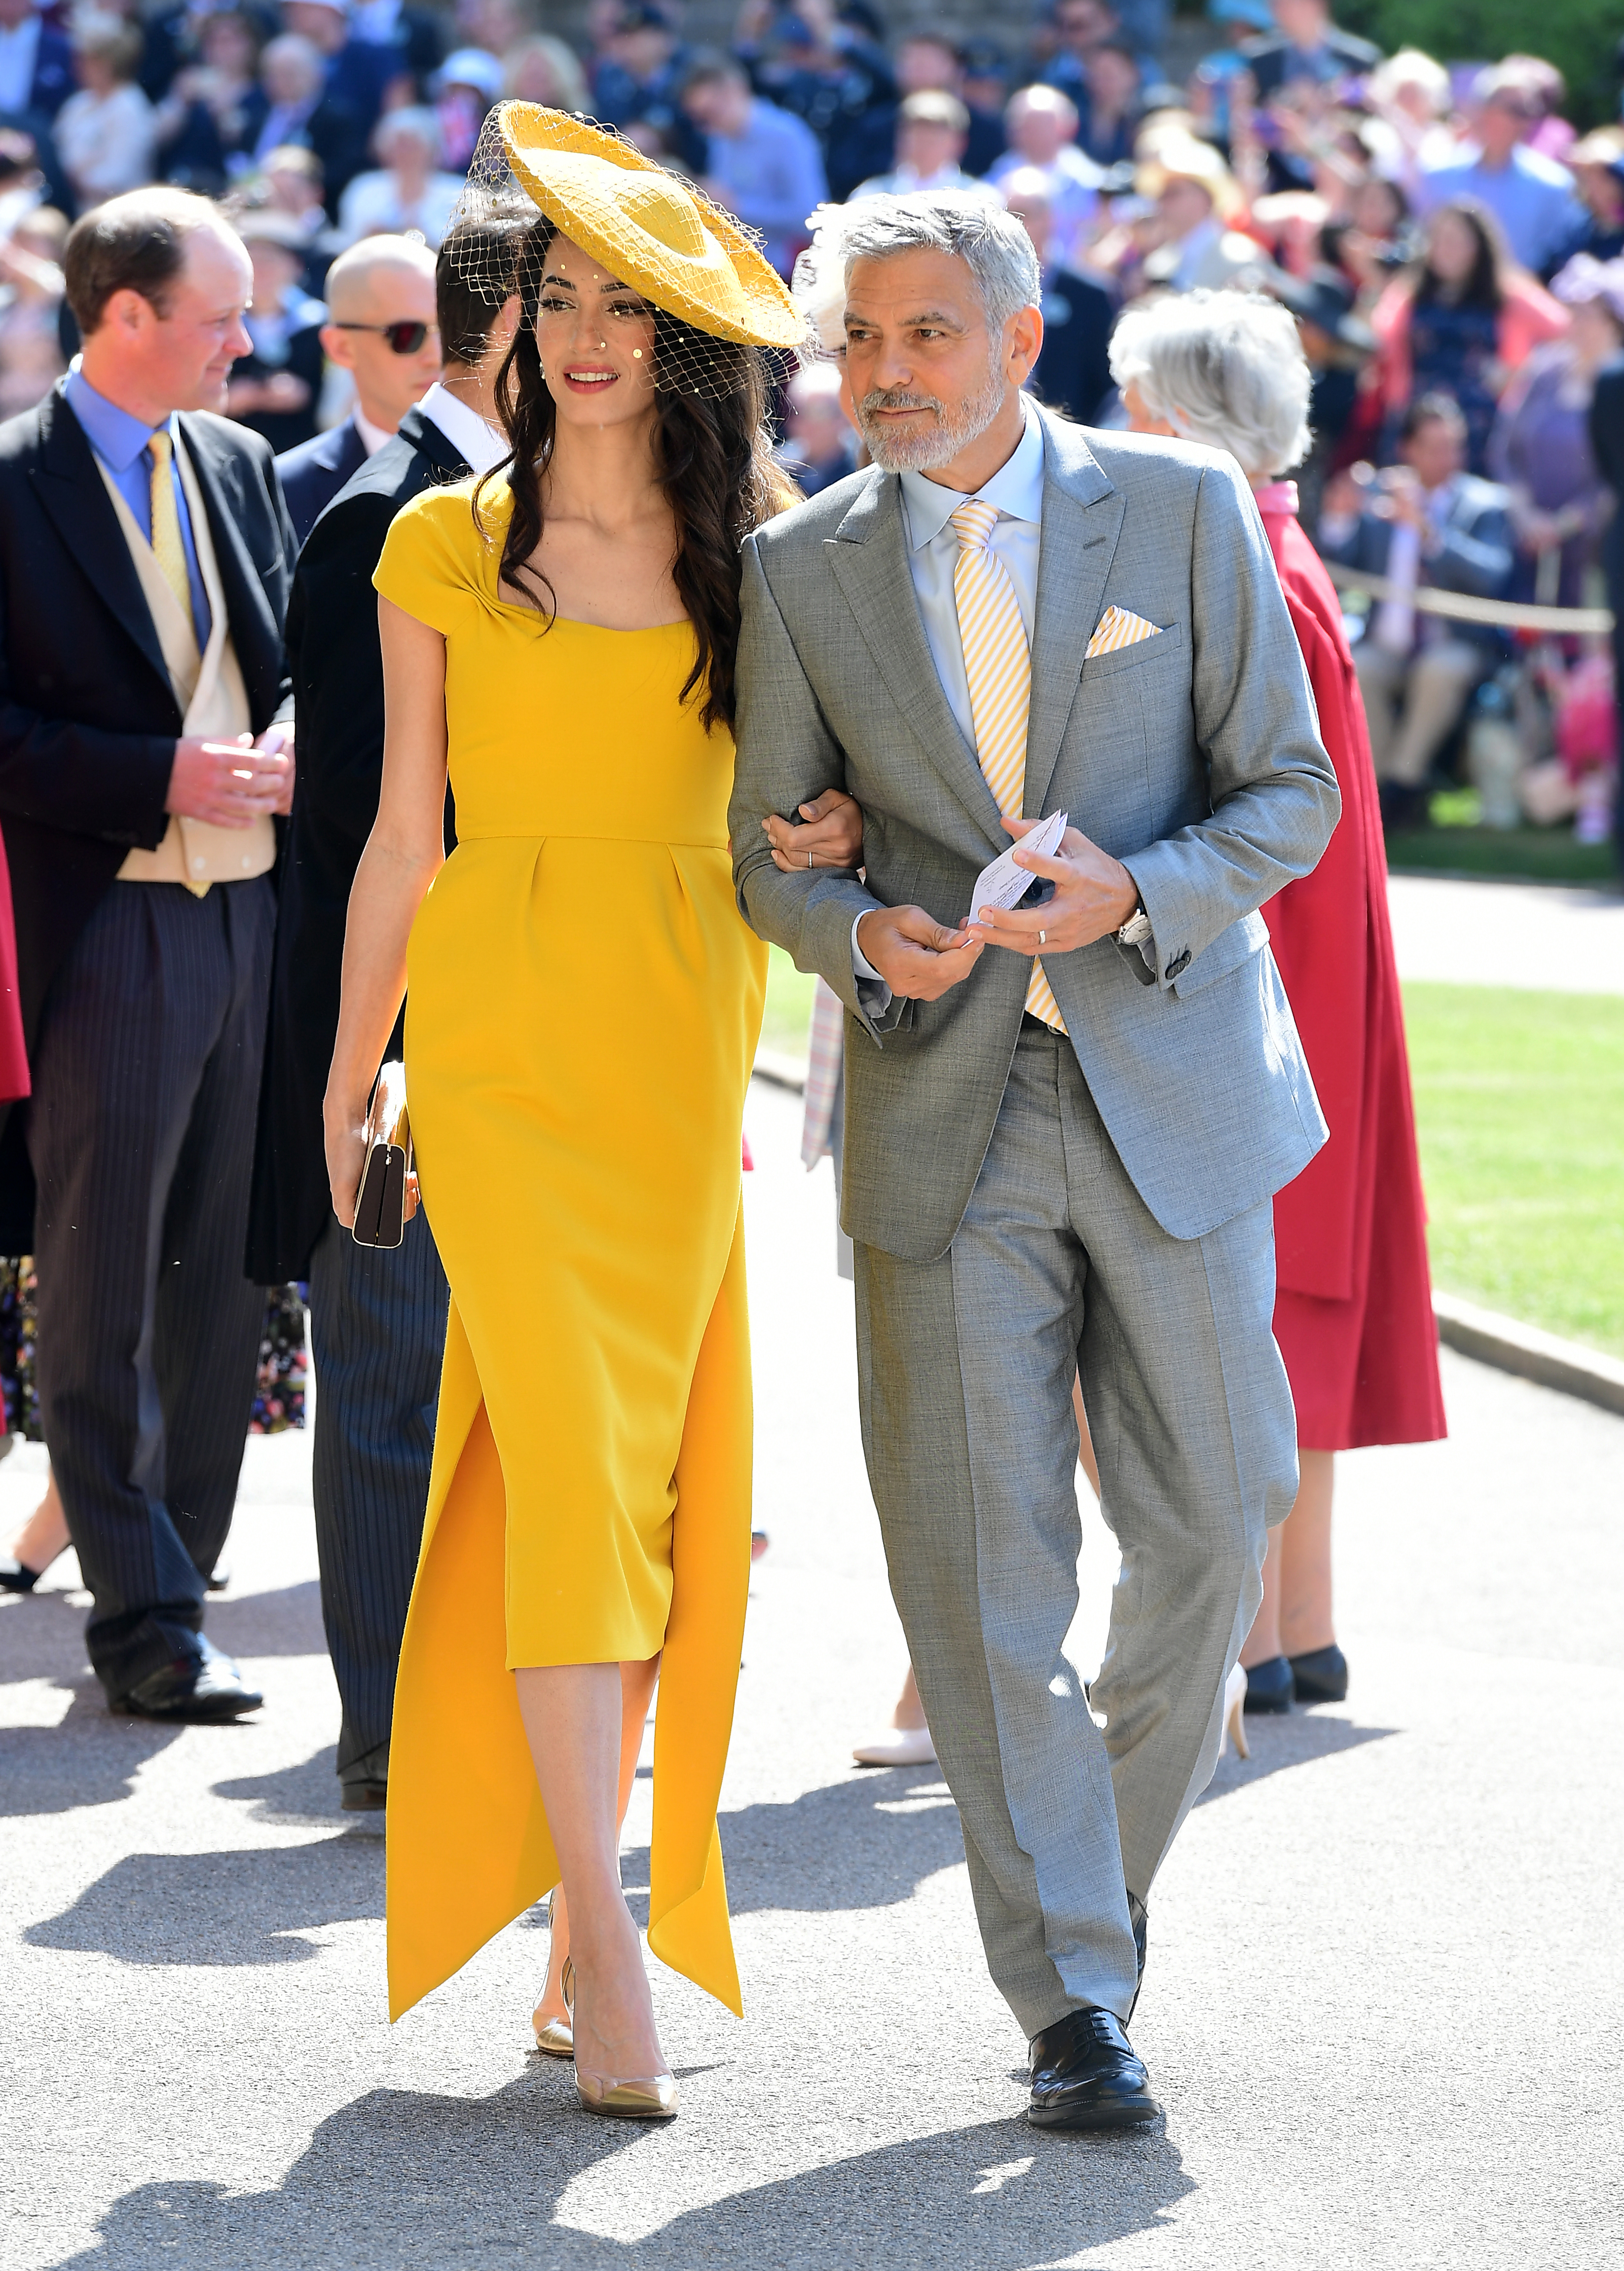 Amal and George Clooney arrive at St George's Chapel at Windsor Castle for the wedding of Meghan Markle and Prince Harry. (Ian West/PA)